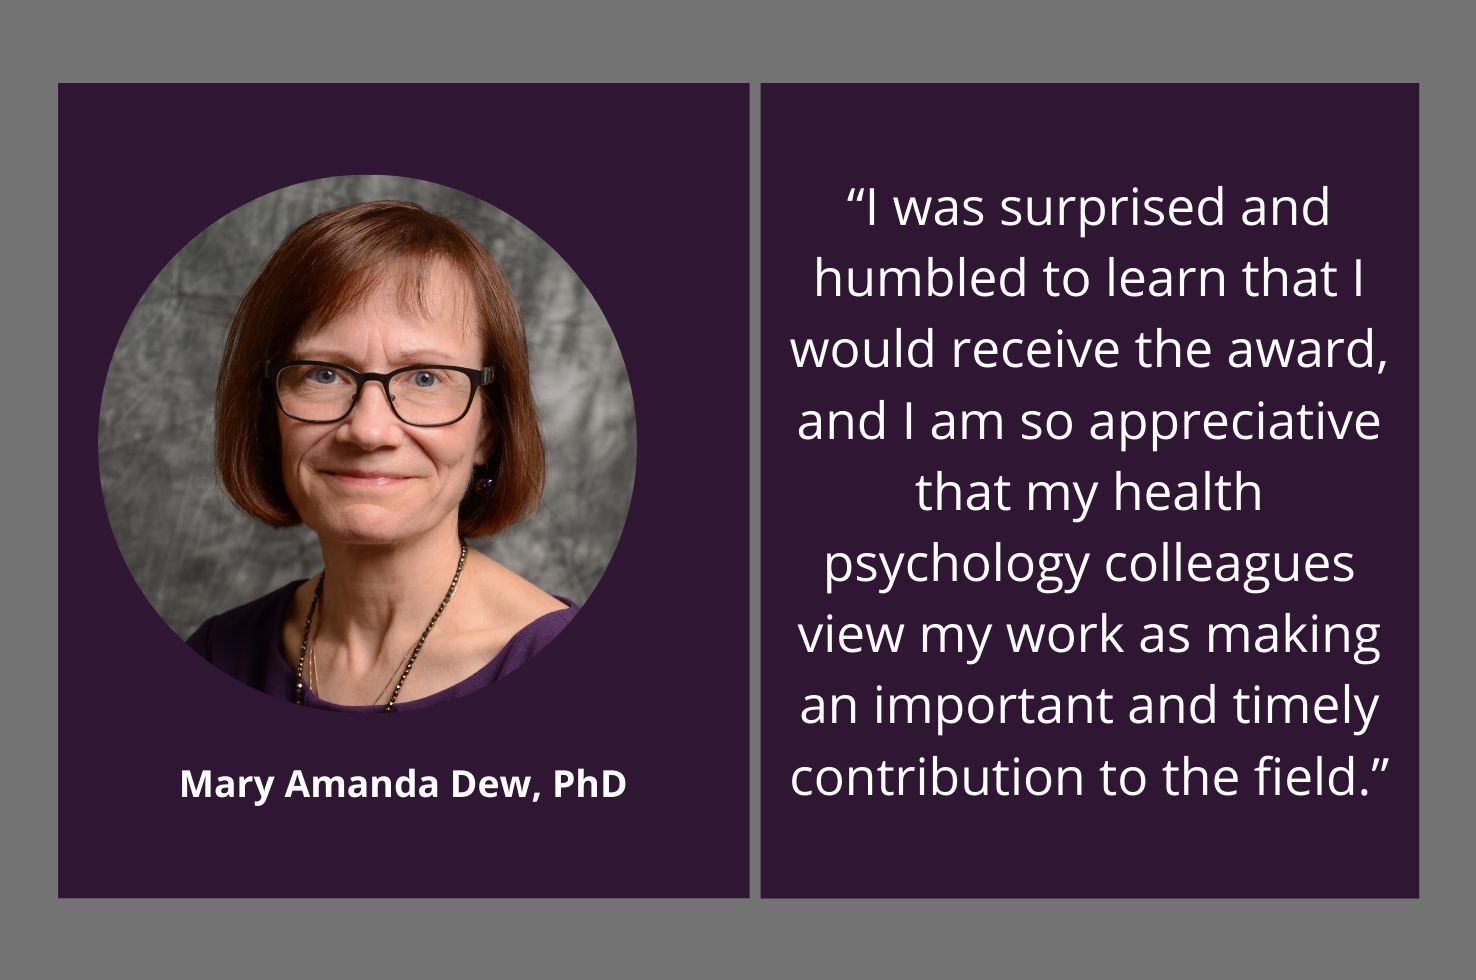 Mary Amanda Dew, PhD, Honored by Society for Health Psychology